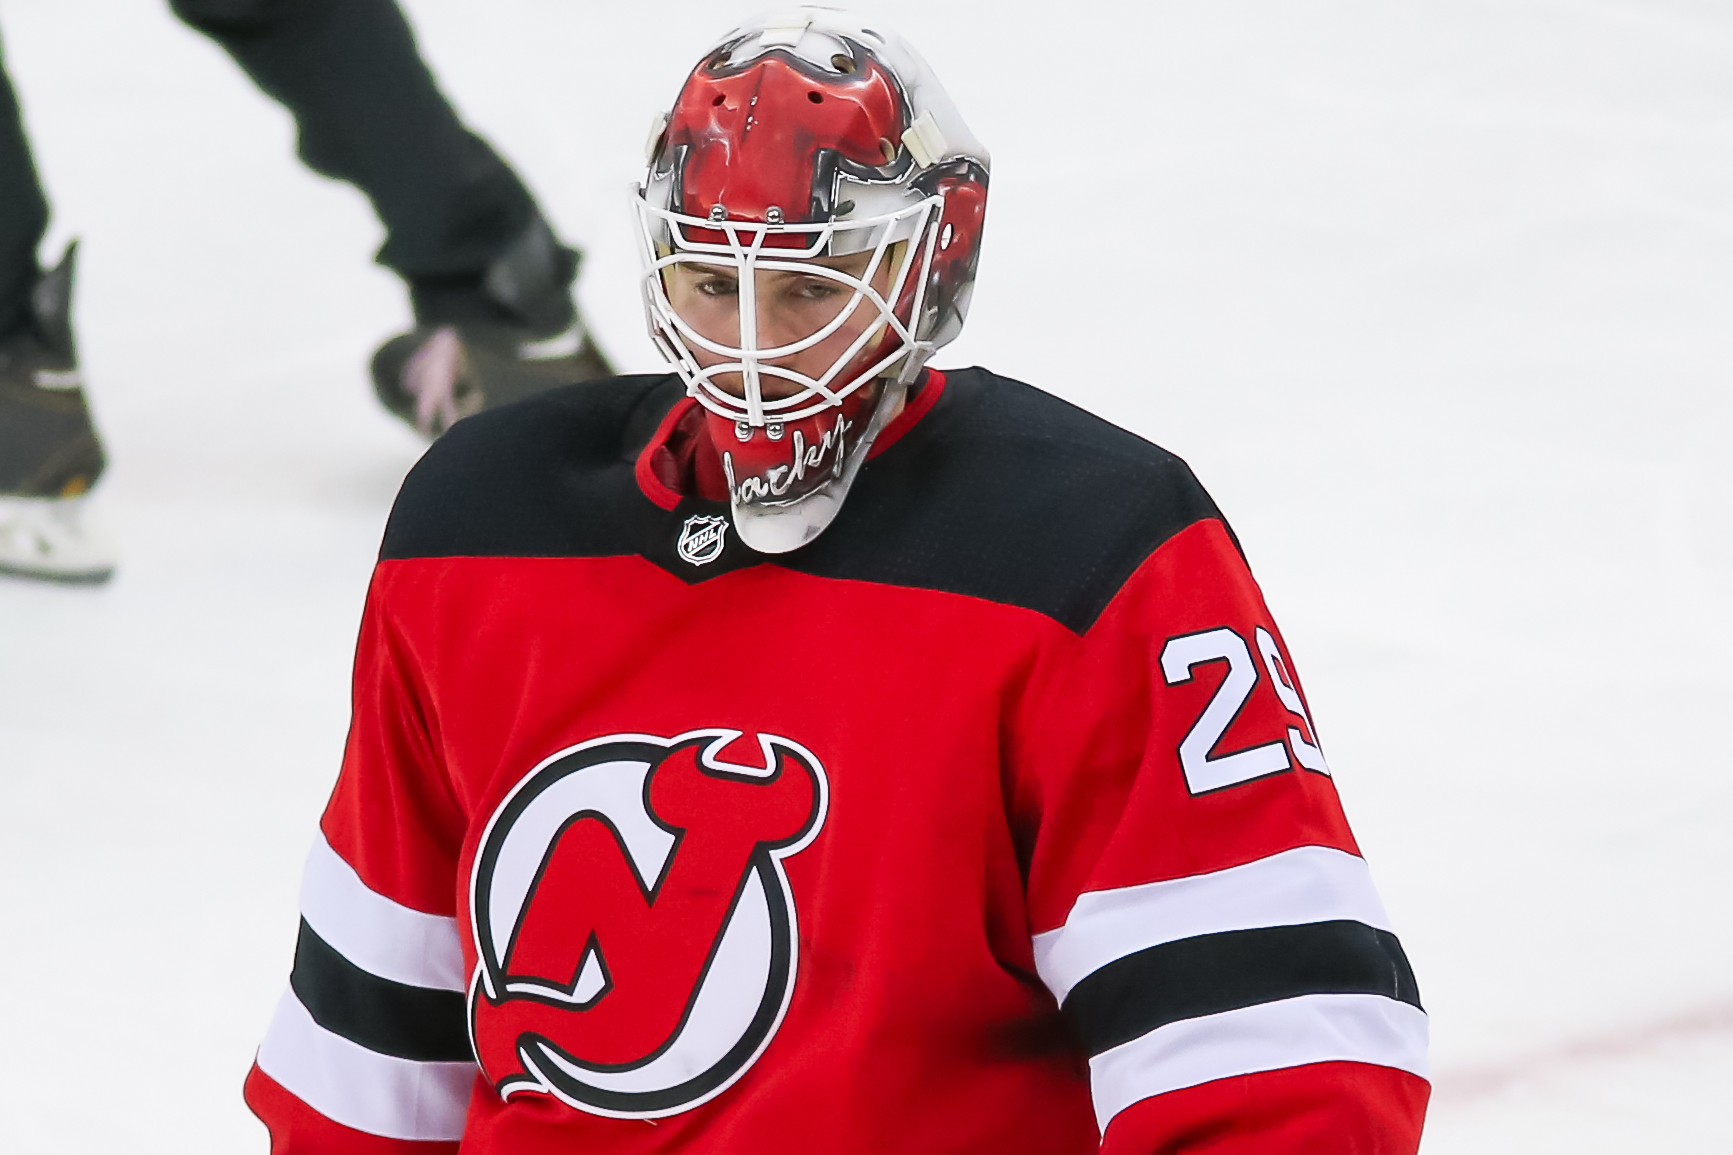 Devils ripped by Bruins, officially eliminated from playoffs